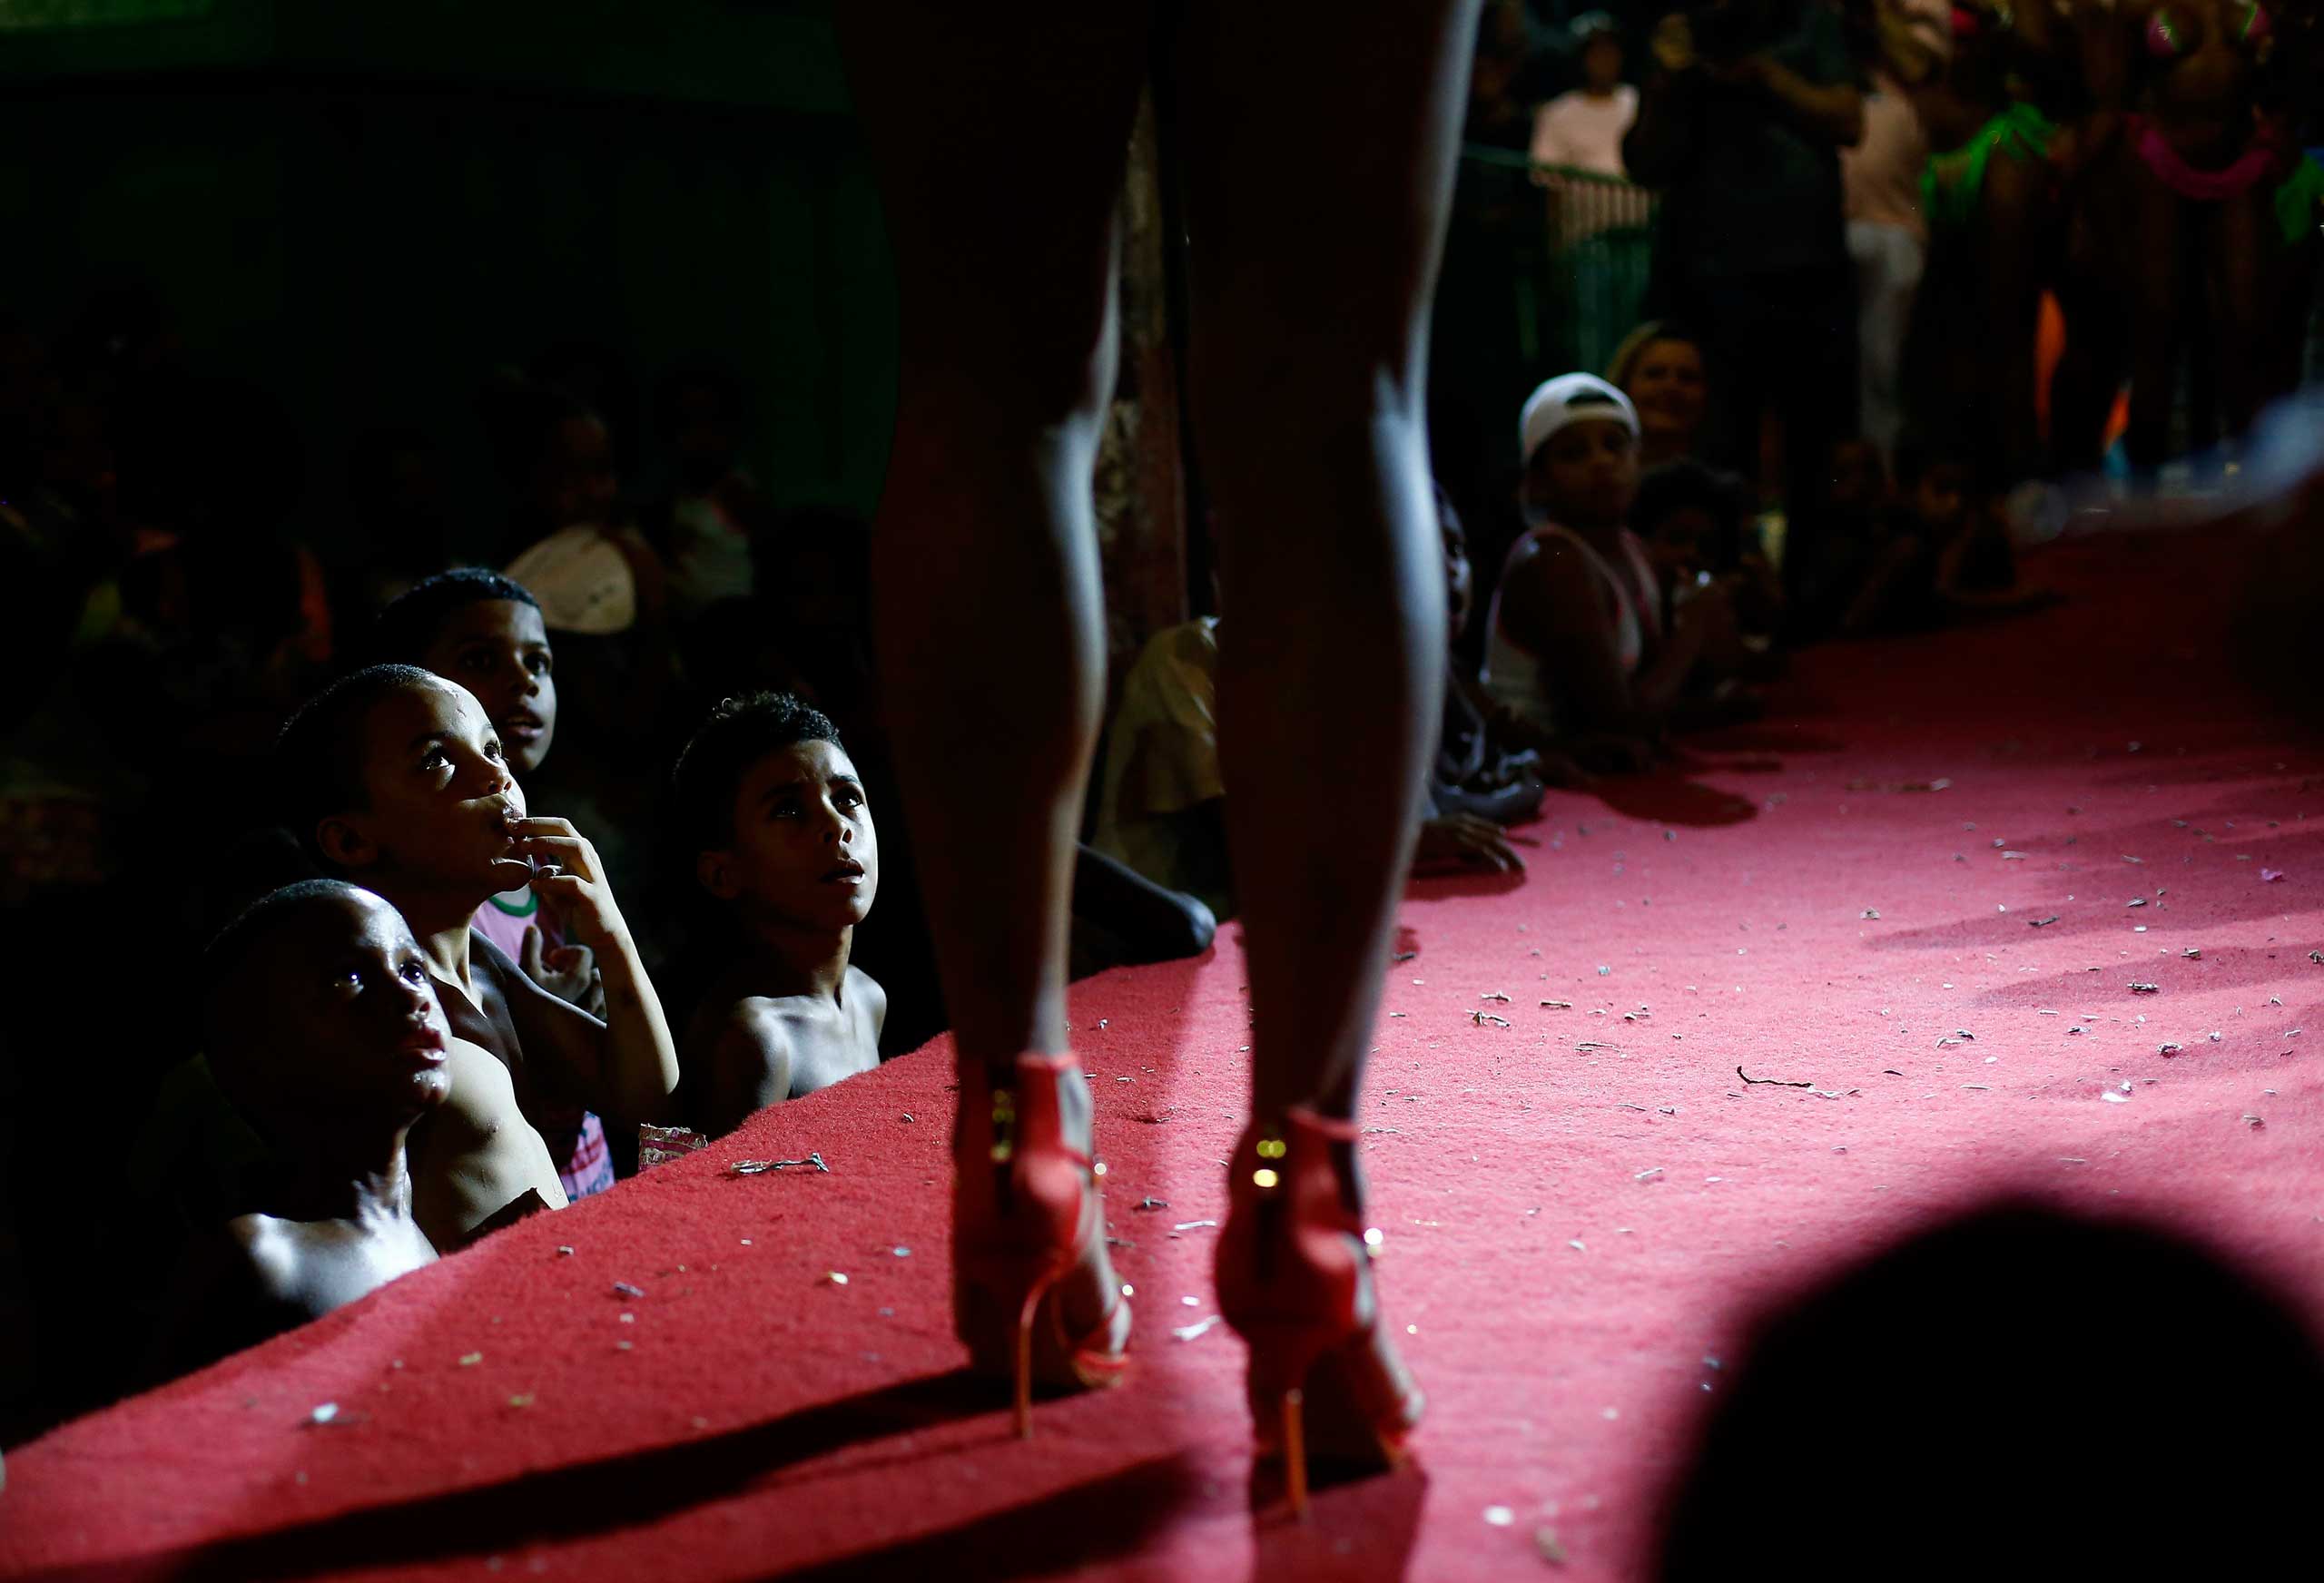 Feb. 11, 2015. Residents of Mangueira slum watch as a participant attends a beauty contest for transvestites and transsexuals at the entrance of the Glam Gay pre-carnival Ball, in Mangueira samba school in Rio de Janeiro.